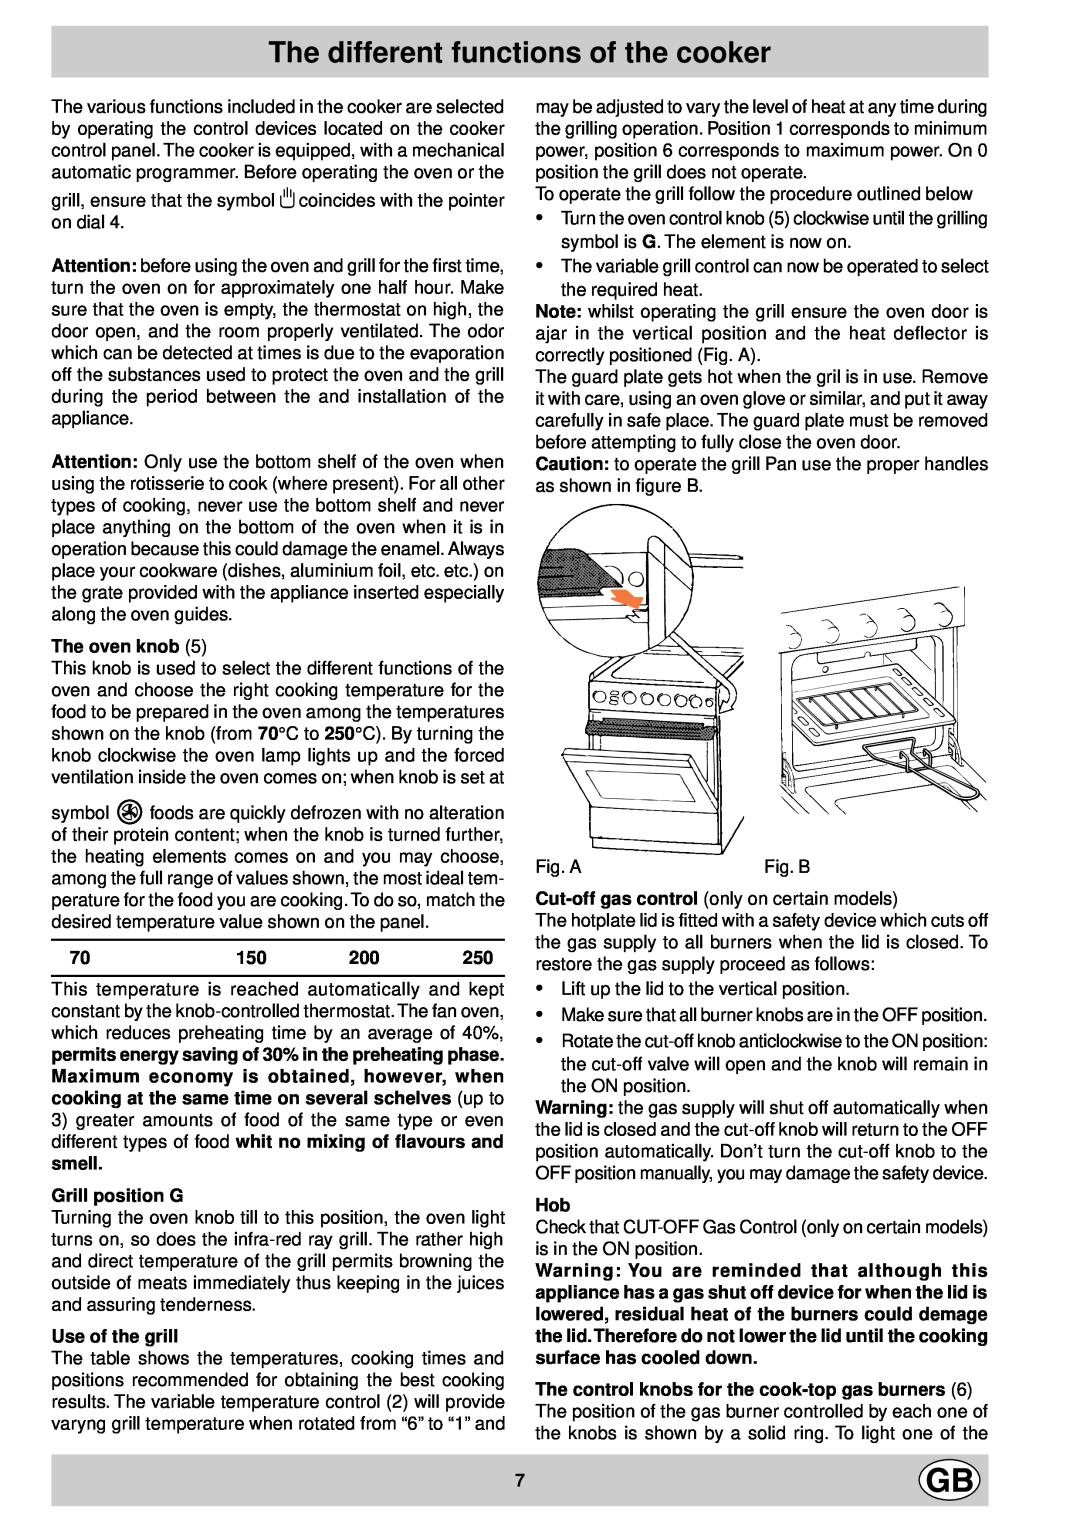 Indesit KG6408, KG6407 AV/G manual The different functions of the cooker, The oven knob, Grill position G, Use of the grill 